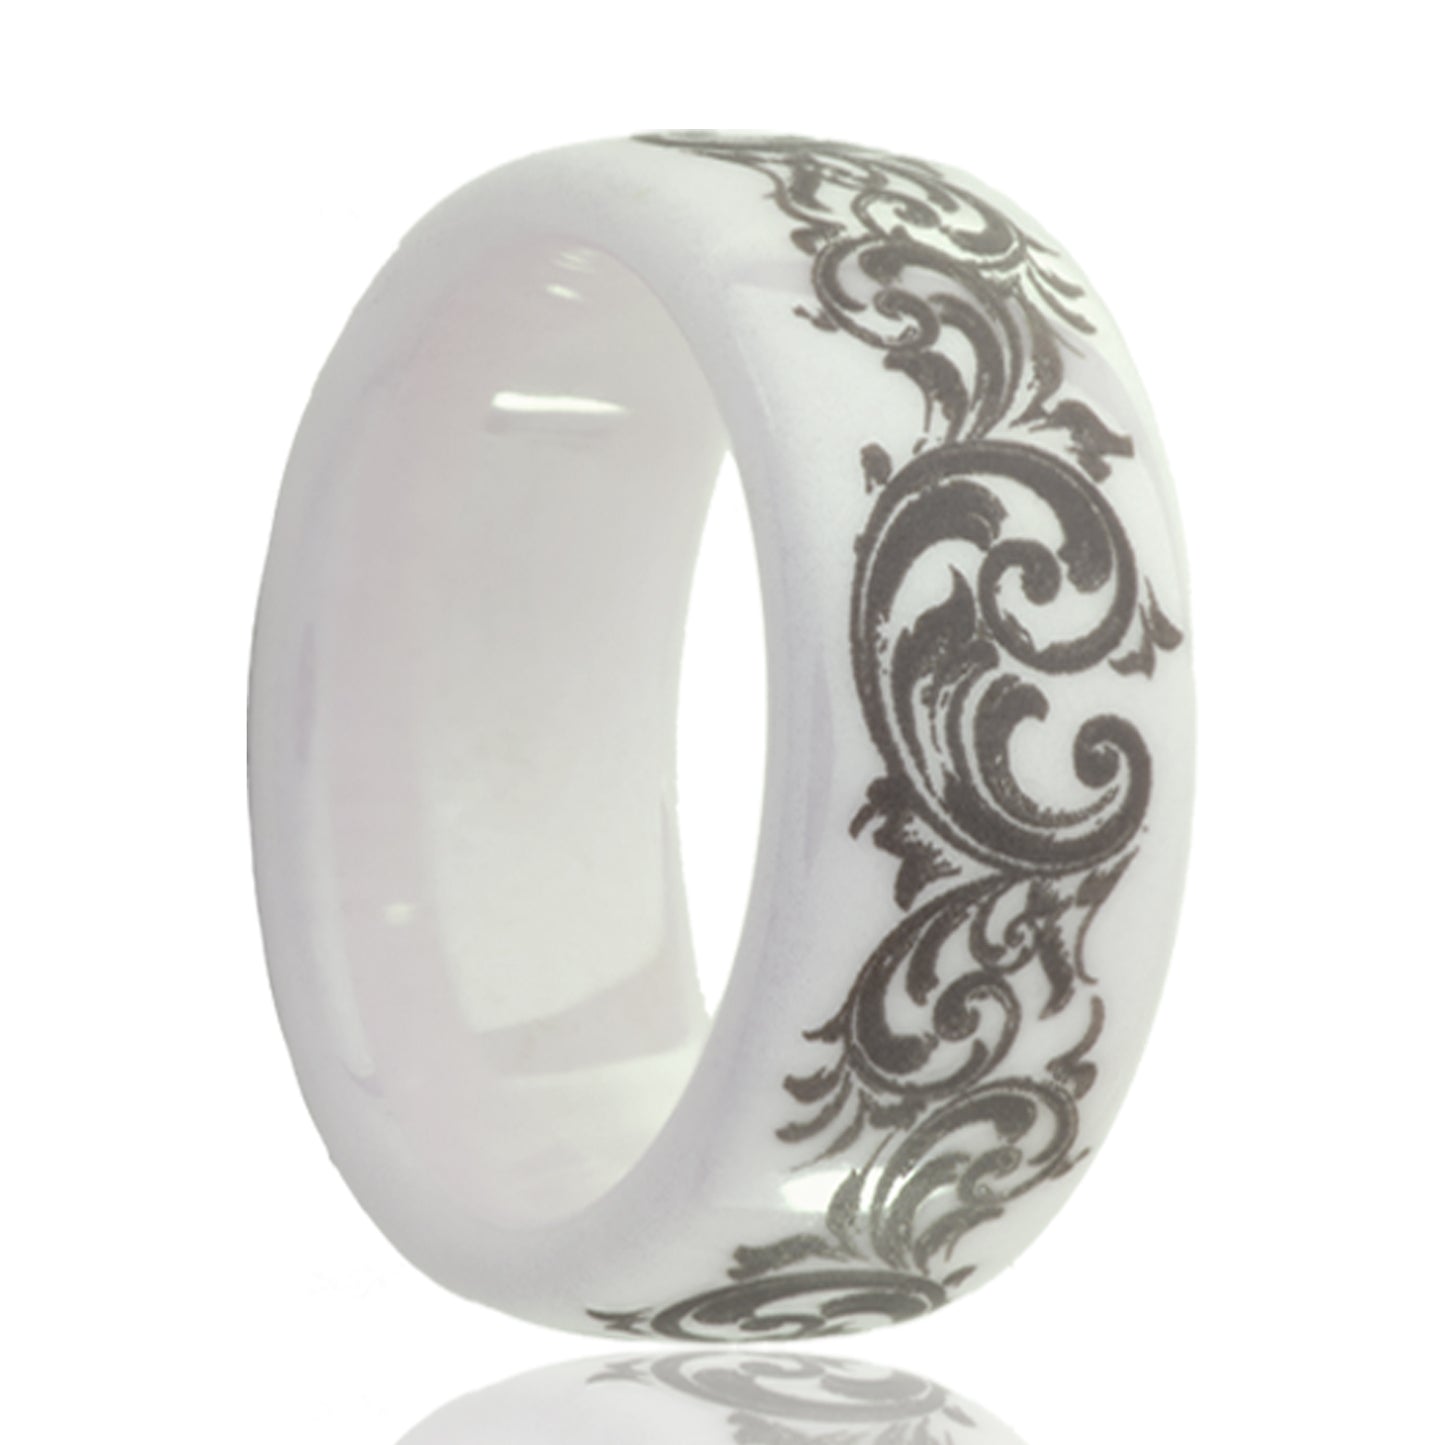 A swirl pattern domed white ceramic men's wedding band displayed on a neutral white background.